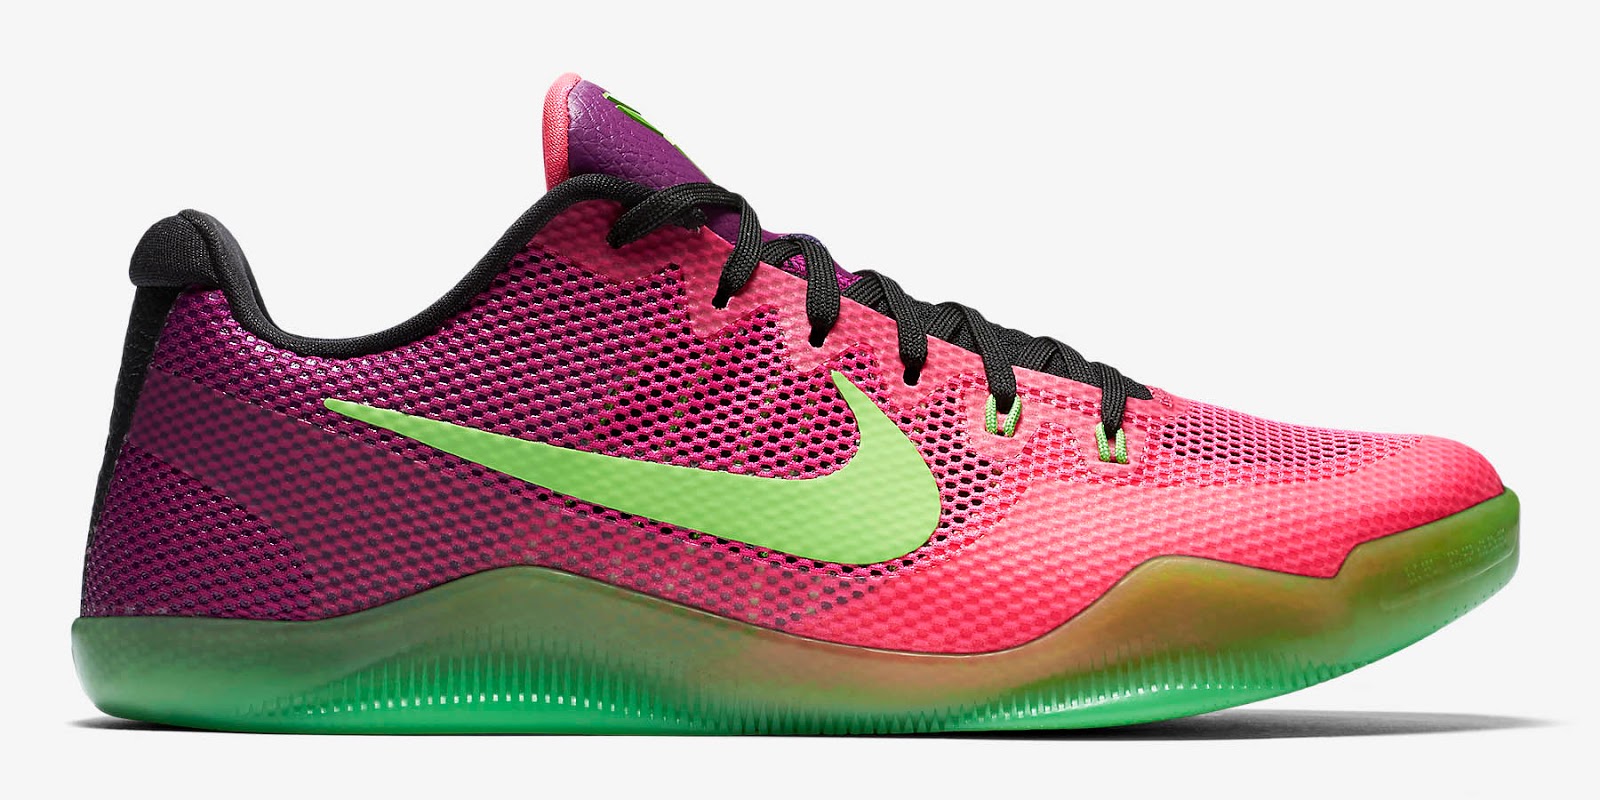 Nike Kobe 11 Mambacurial Boots Released